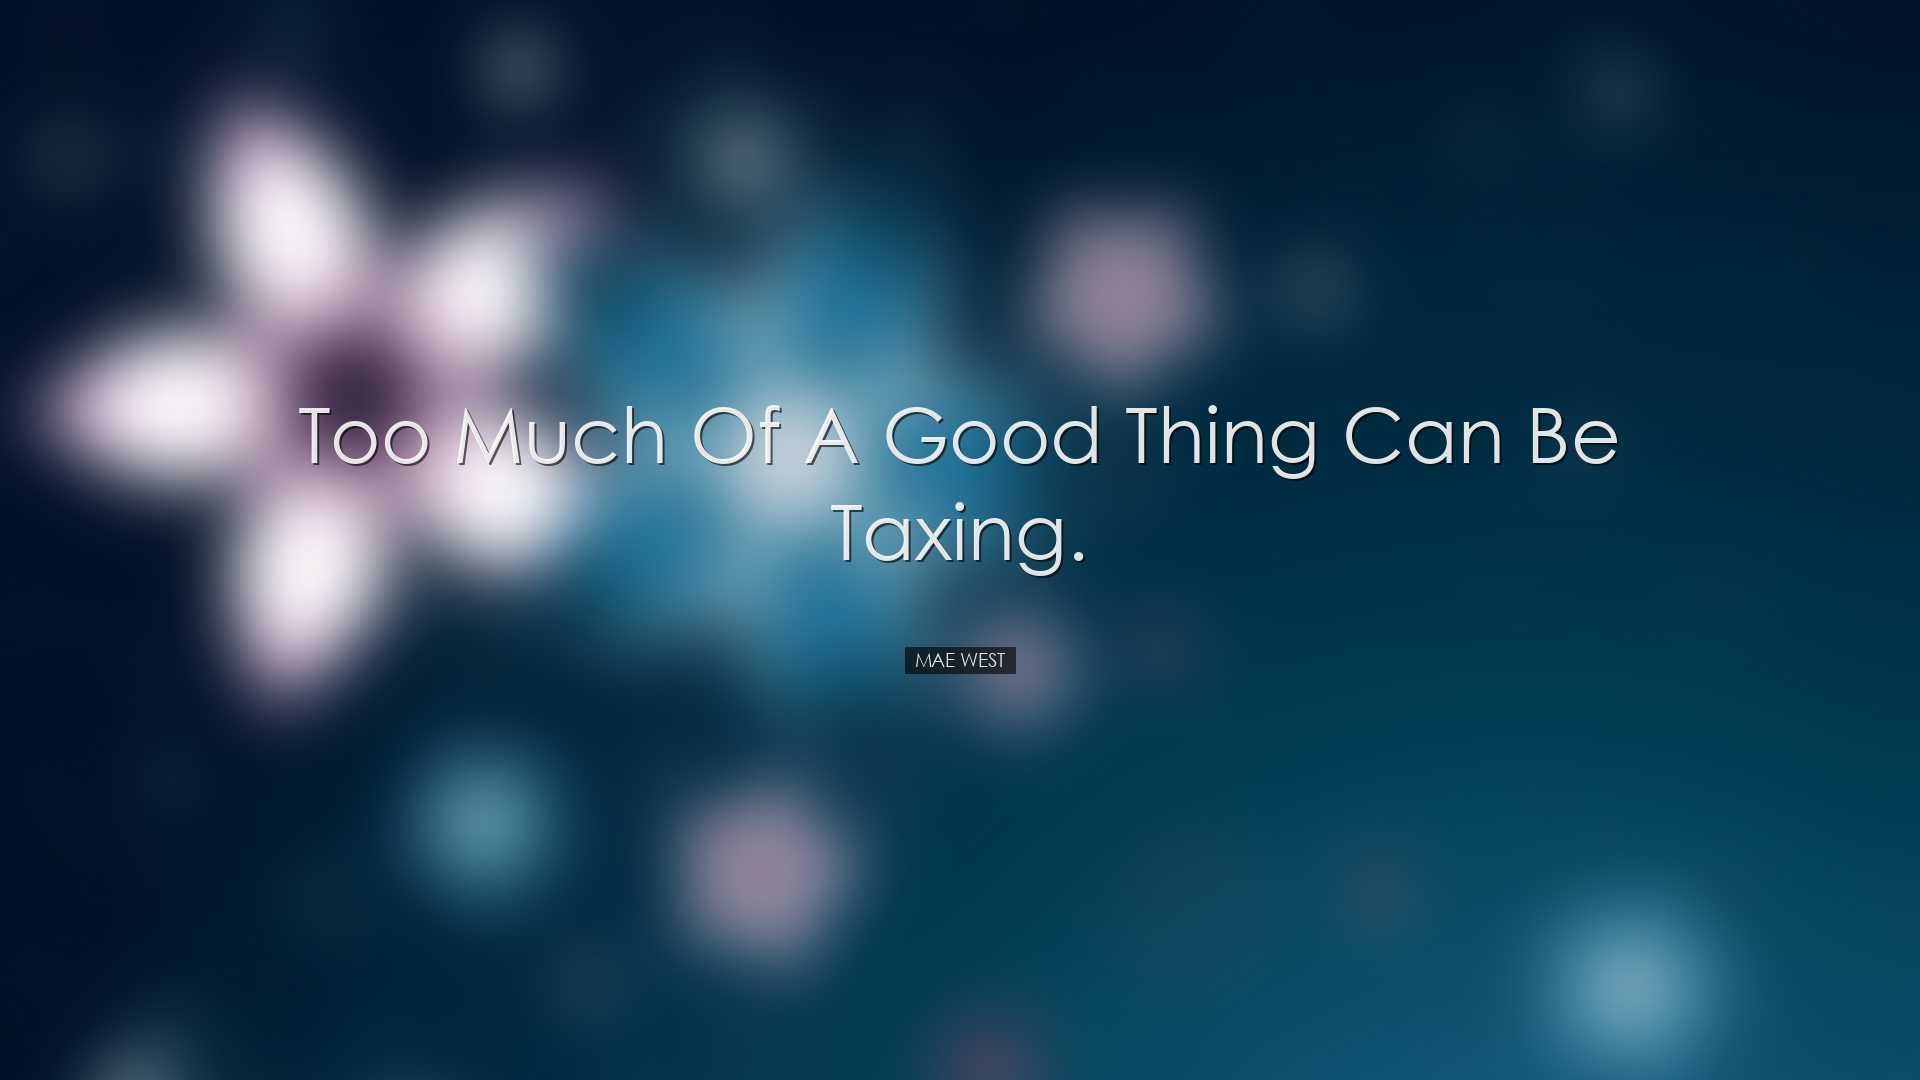 Too much of a good thing can be taxing. - Mae West